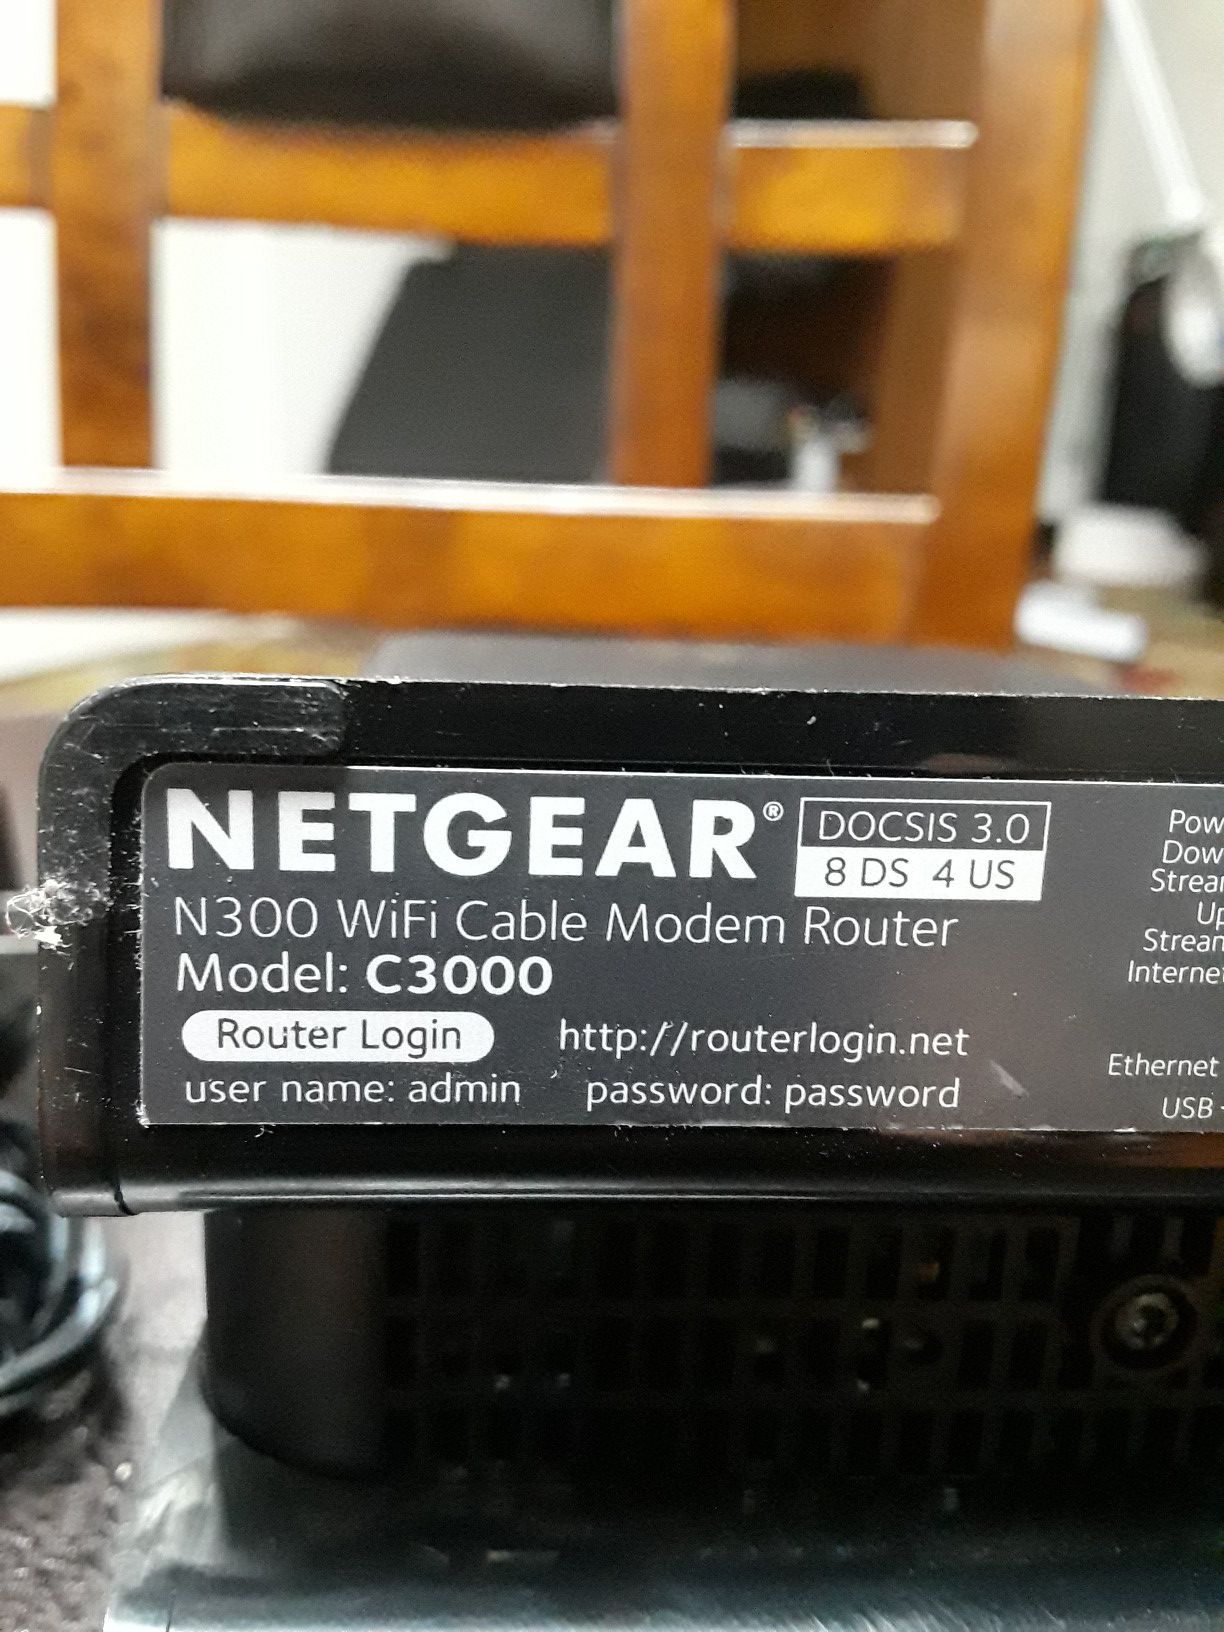 N300 Netgear wifi modem and router